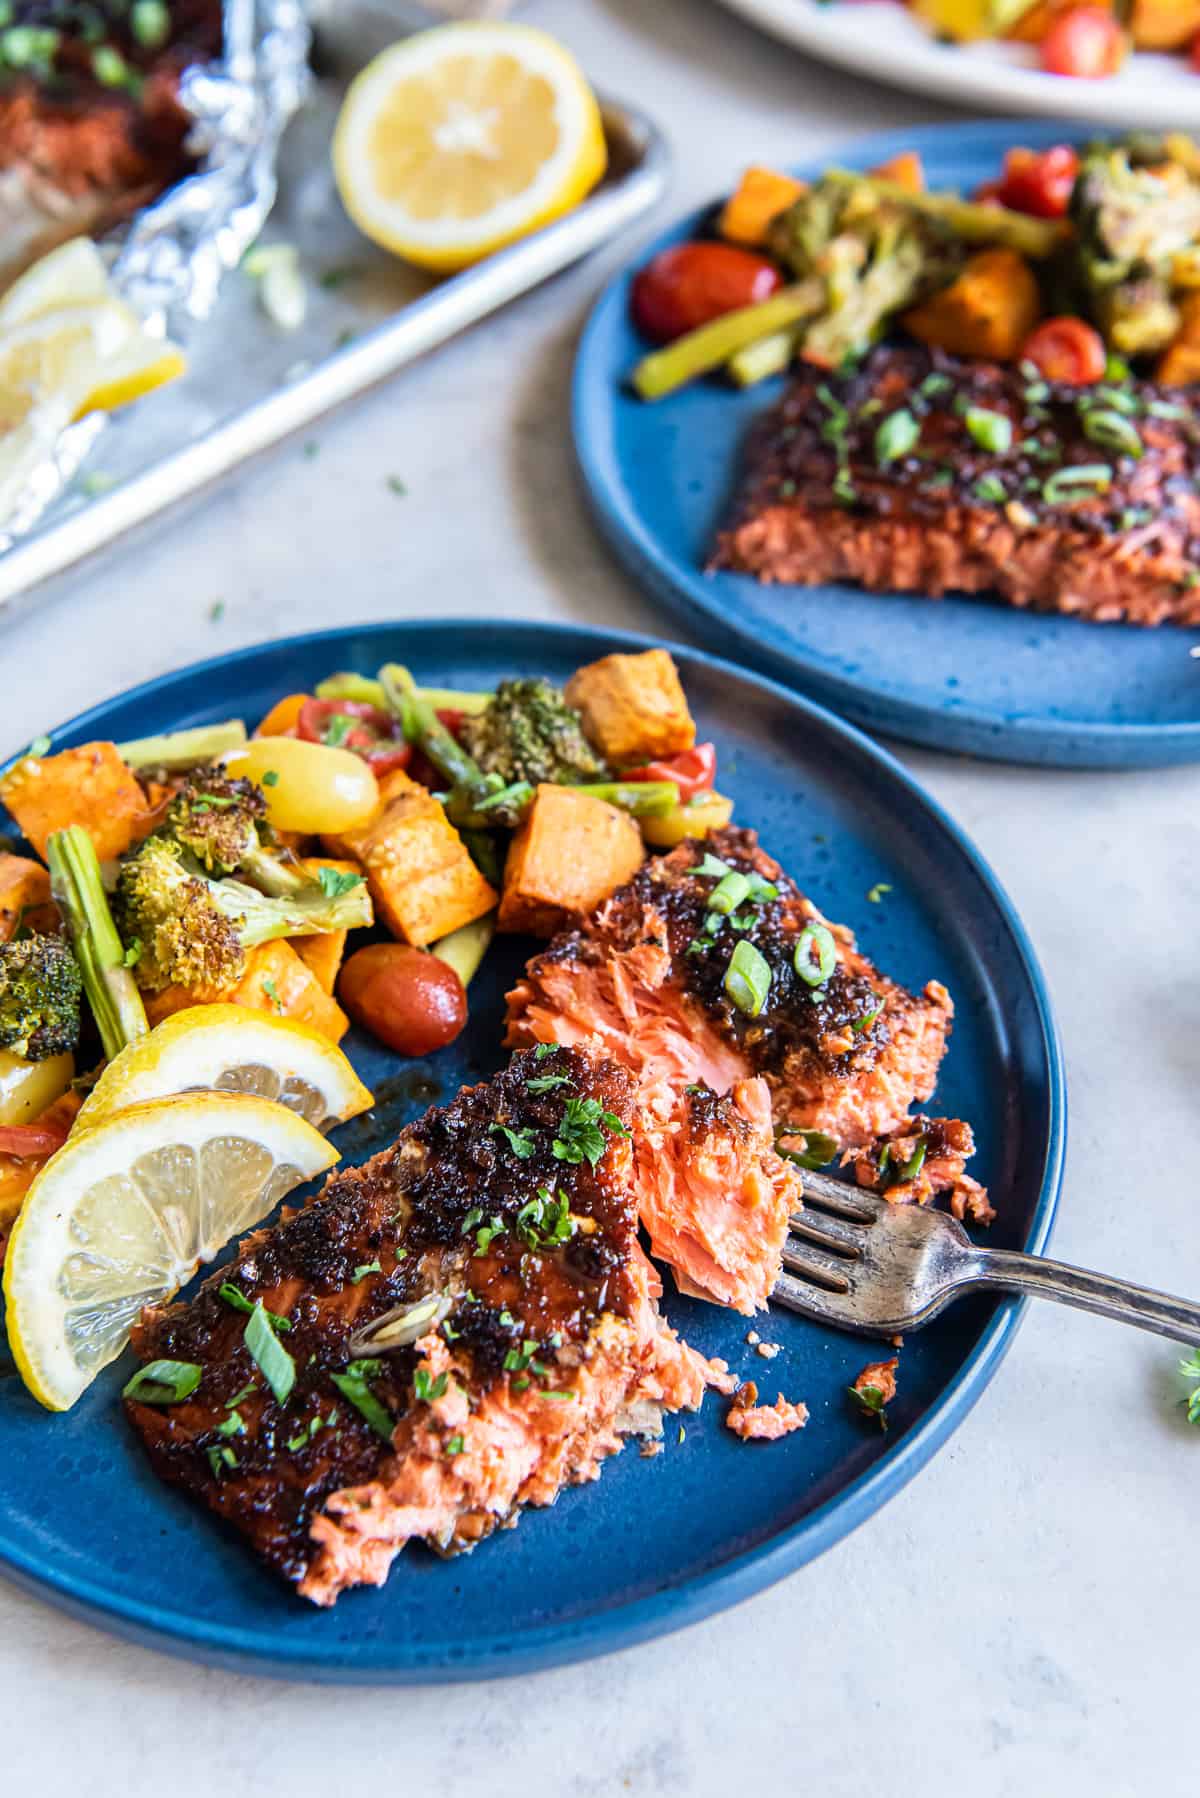 A fork breaking into a slice of glazed sockeye salmon on a blue plate with roasted vegetables.